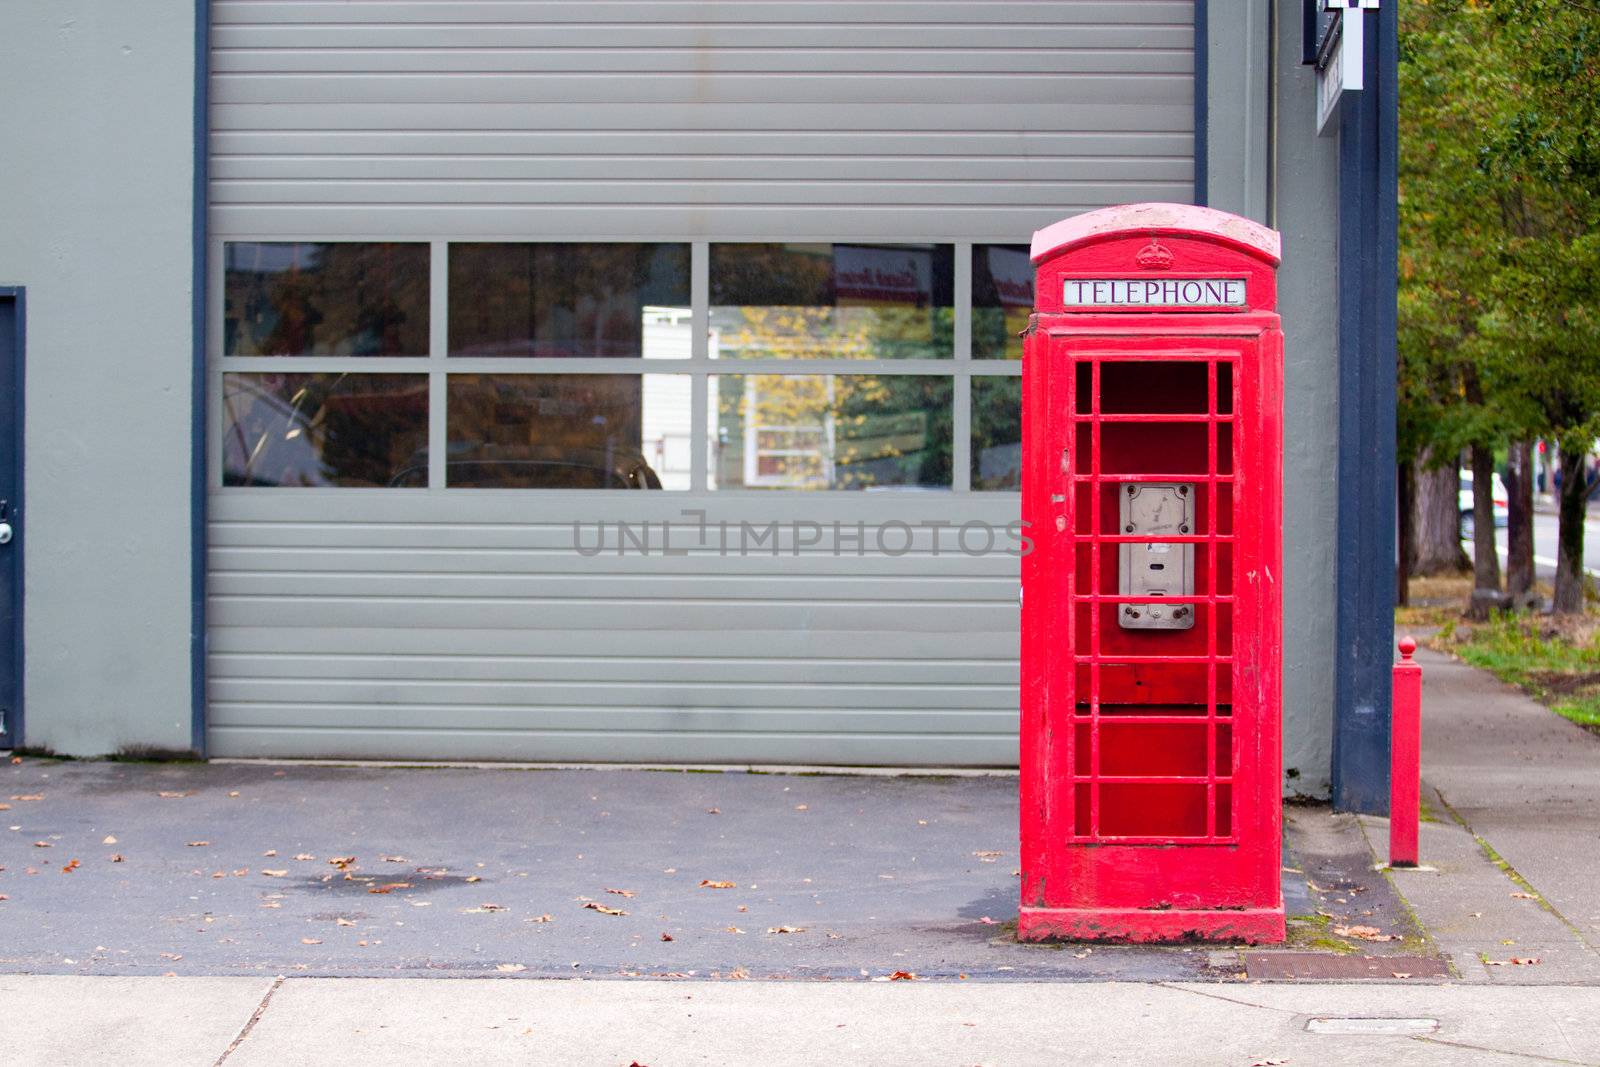 A bright red telephone booth sits abandoned on a street corner.